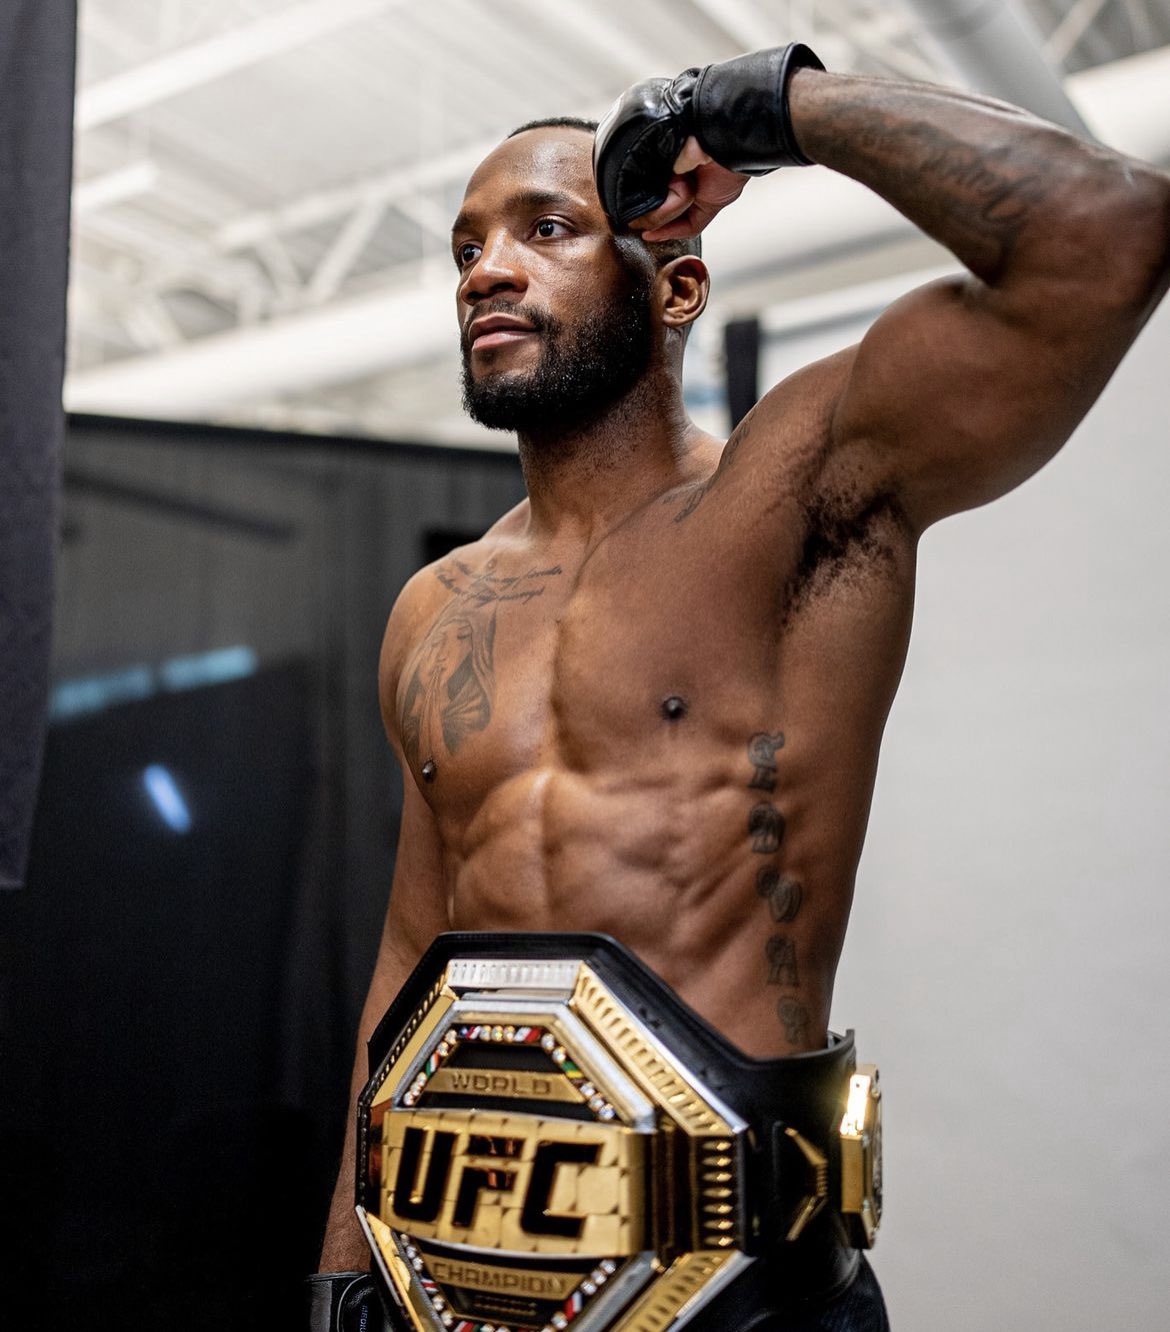 Leon Edwards looking to Surpass GOAT Georges St-Pierre